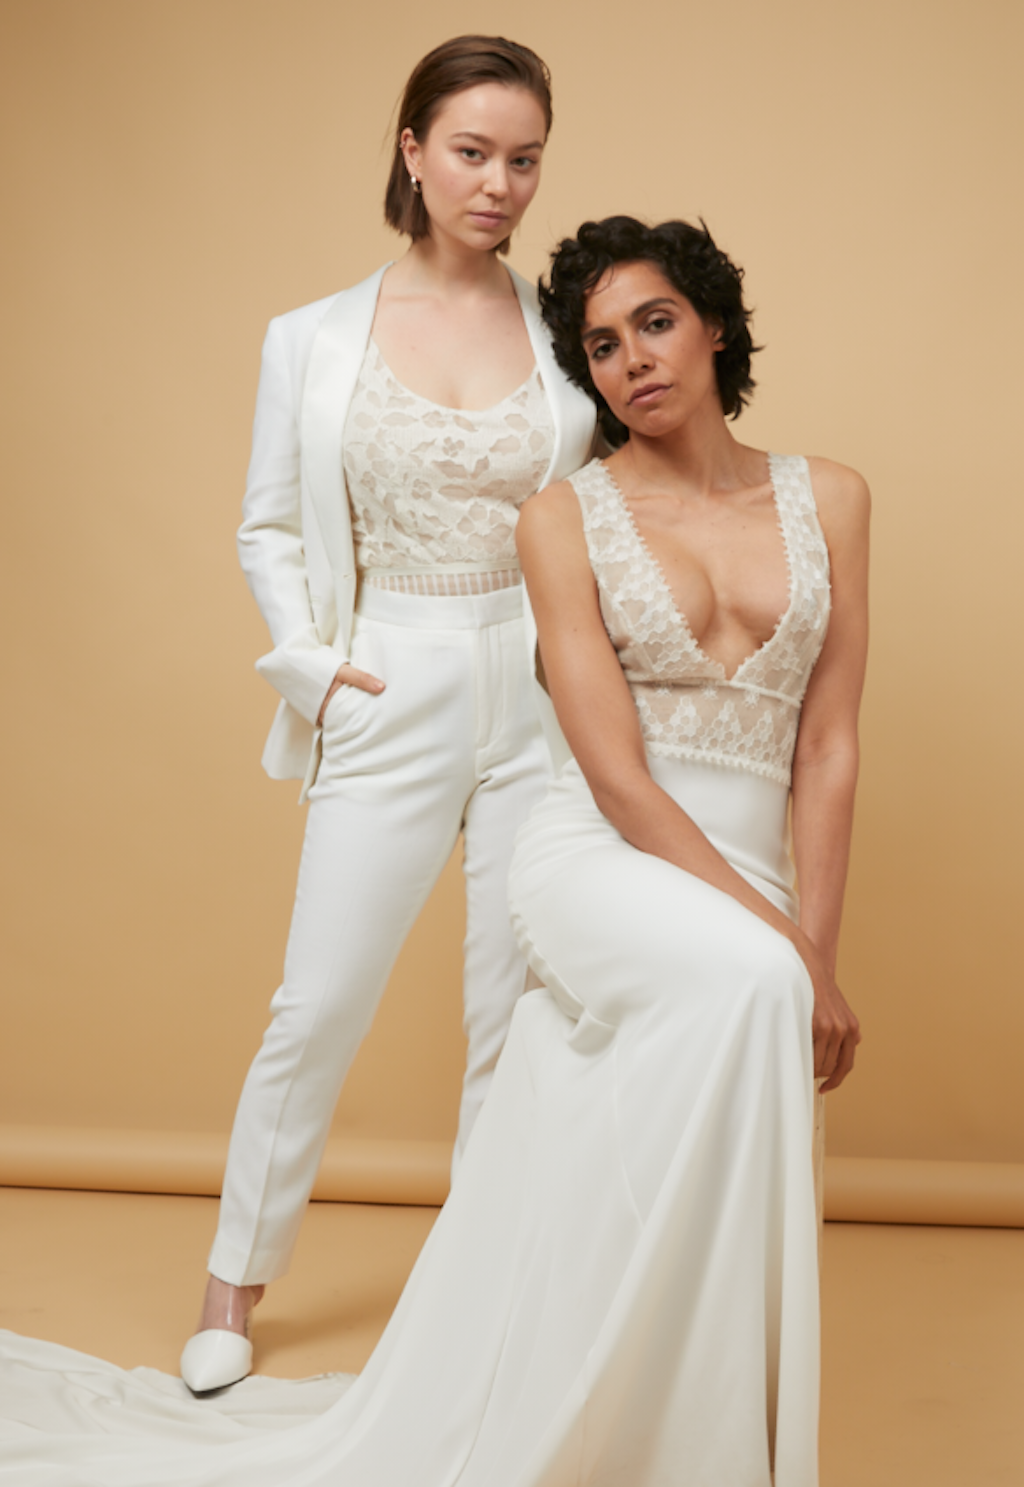 White Women's Tuxedo Wedding Bridal Suit with Lace Cami Tank | The Groomsmen Suit | Wedding Dress Trends 2019